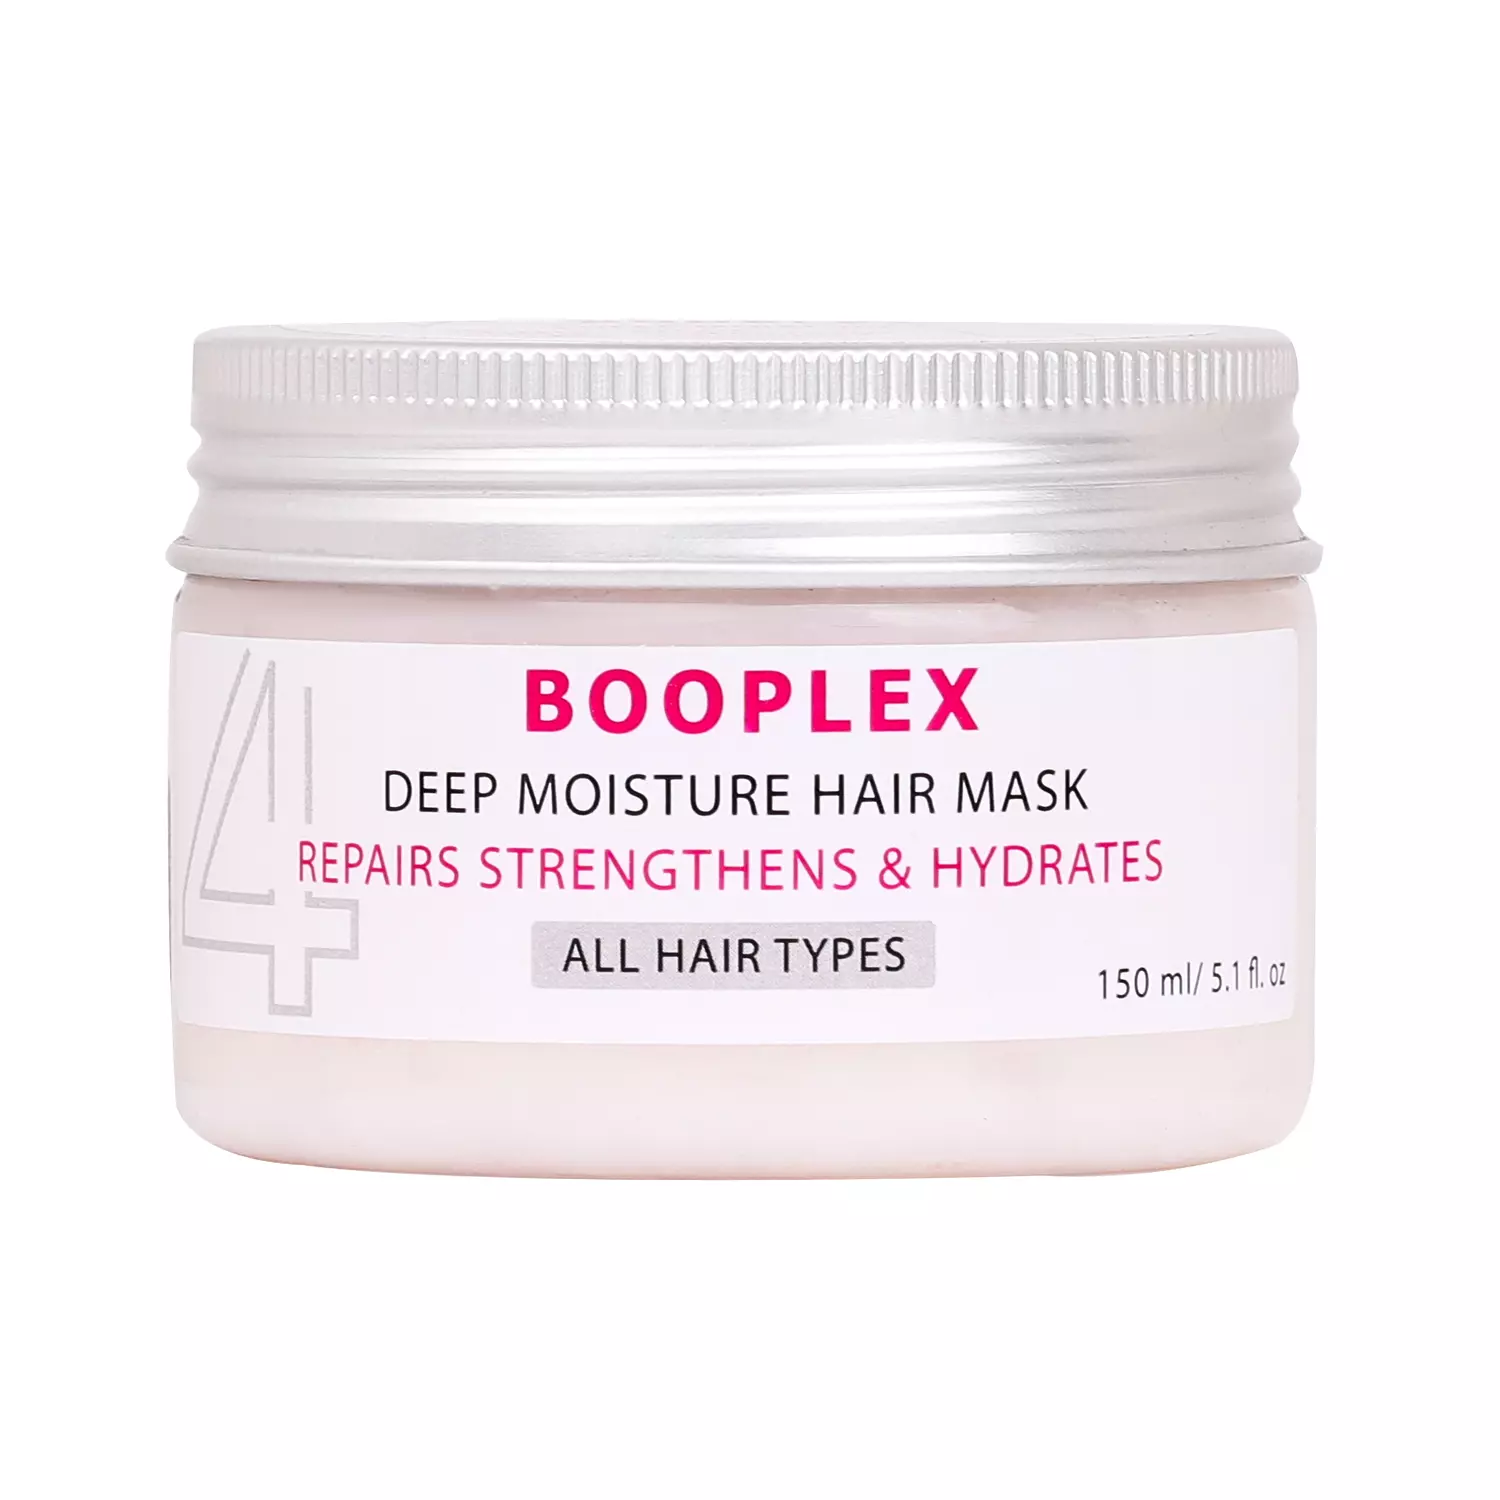 BOOPLEX NO.4 HAIR MASK hover image